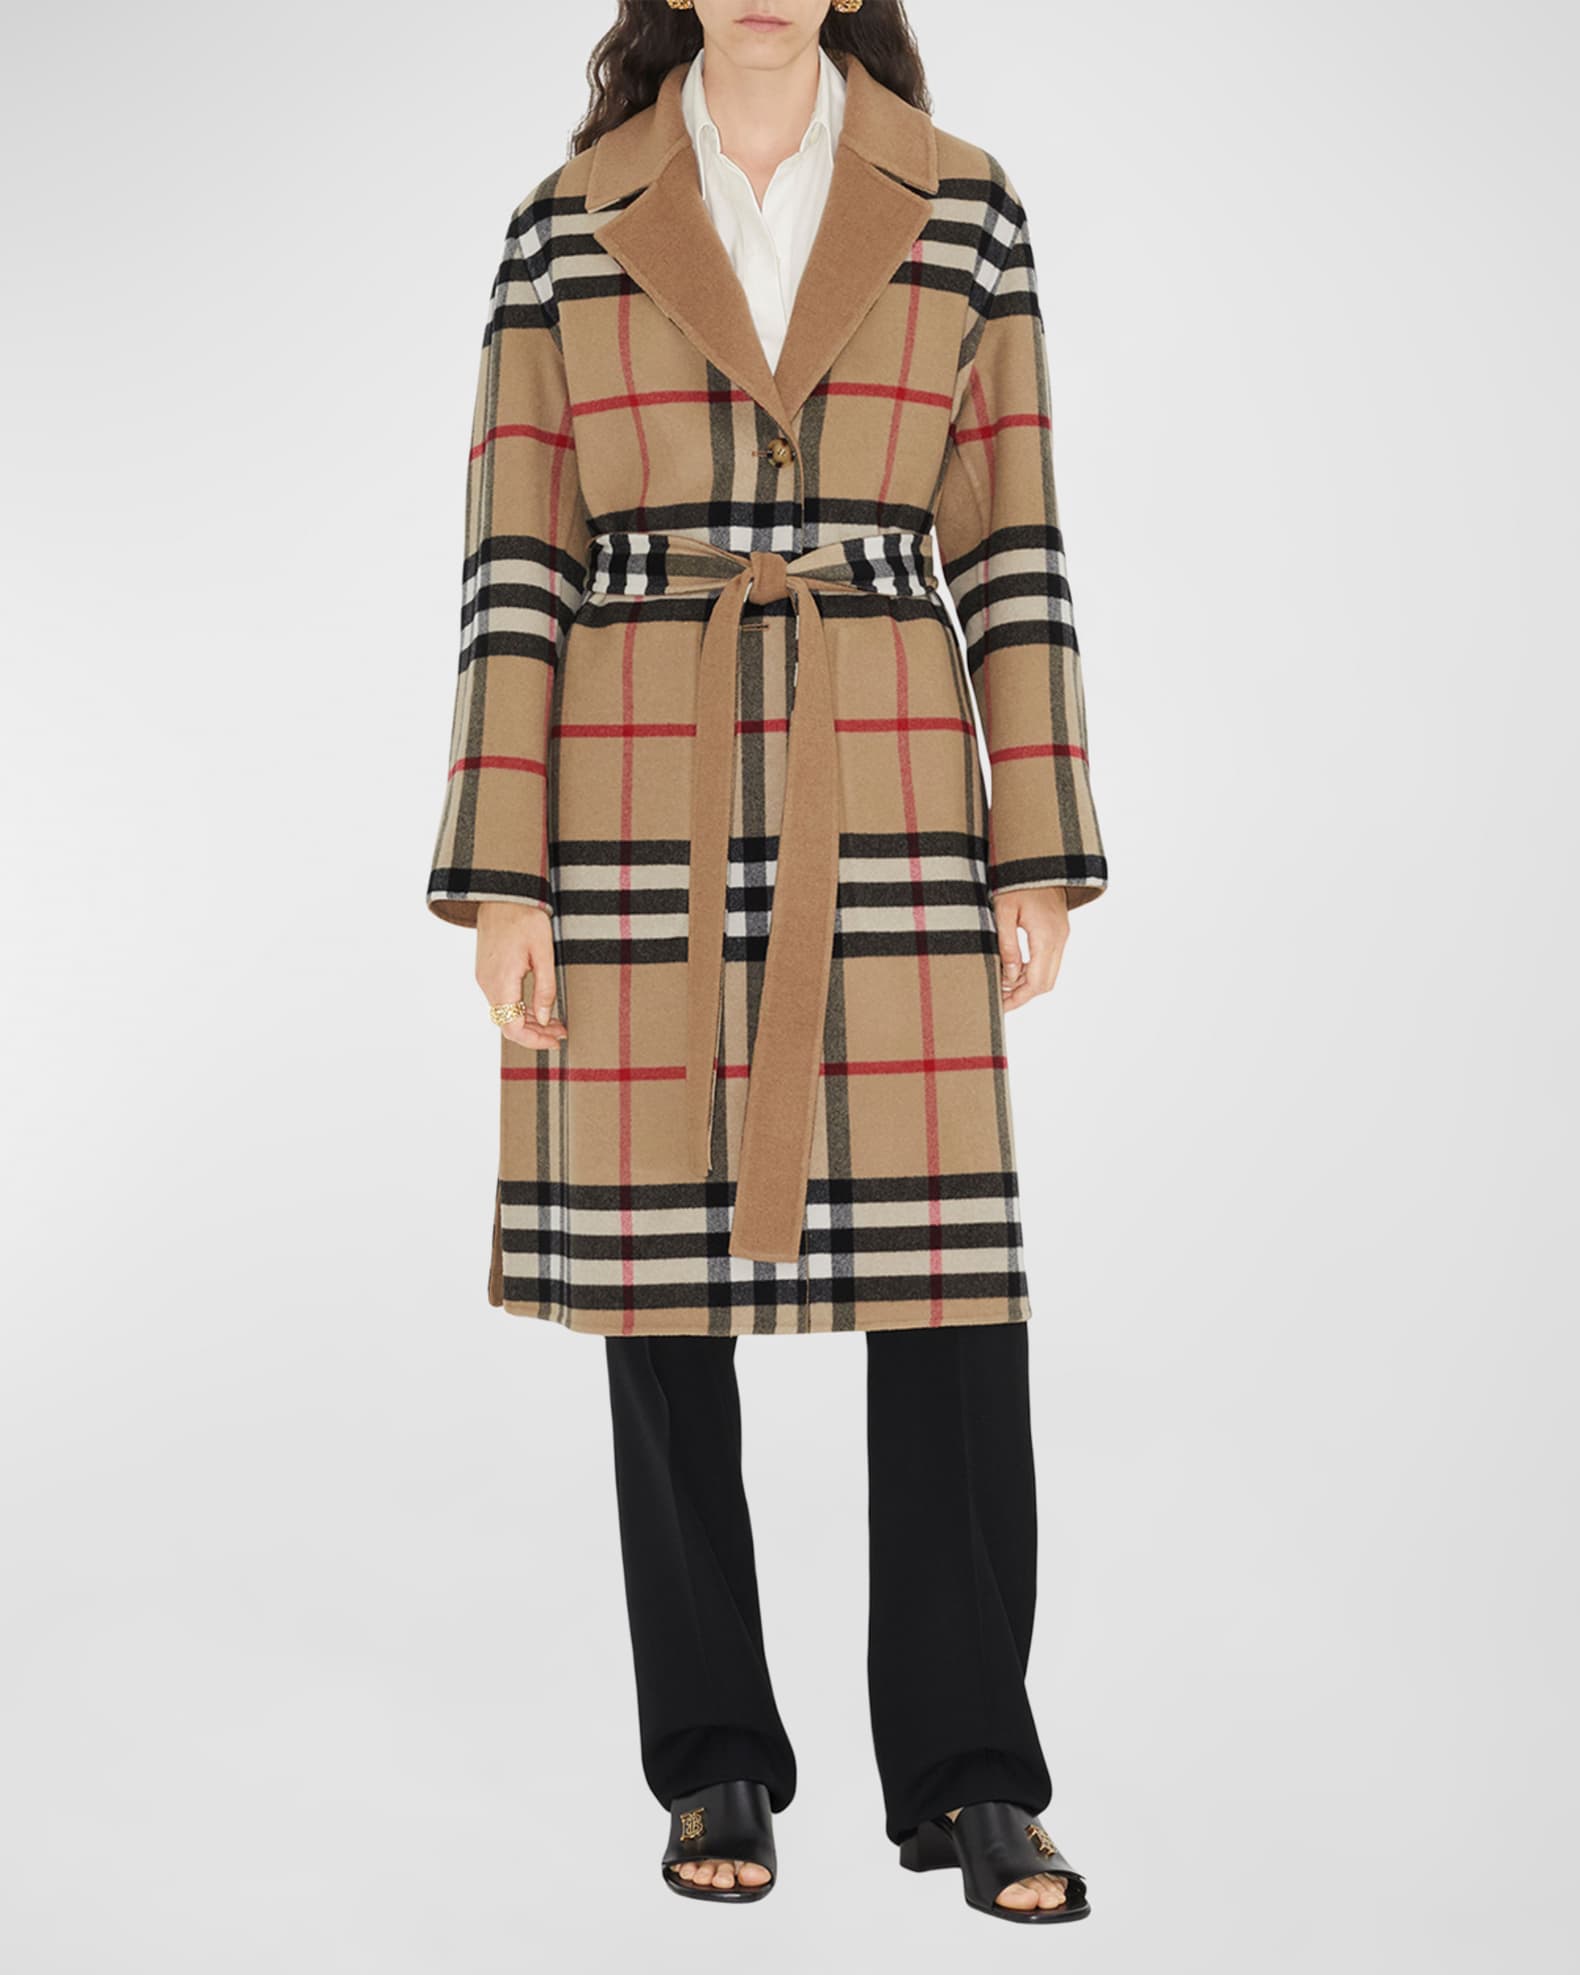 Tory Burch - Tory wearing our convertible Wool Coat and Lee